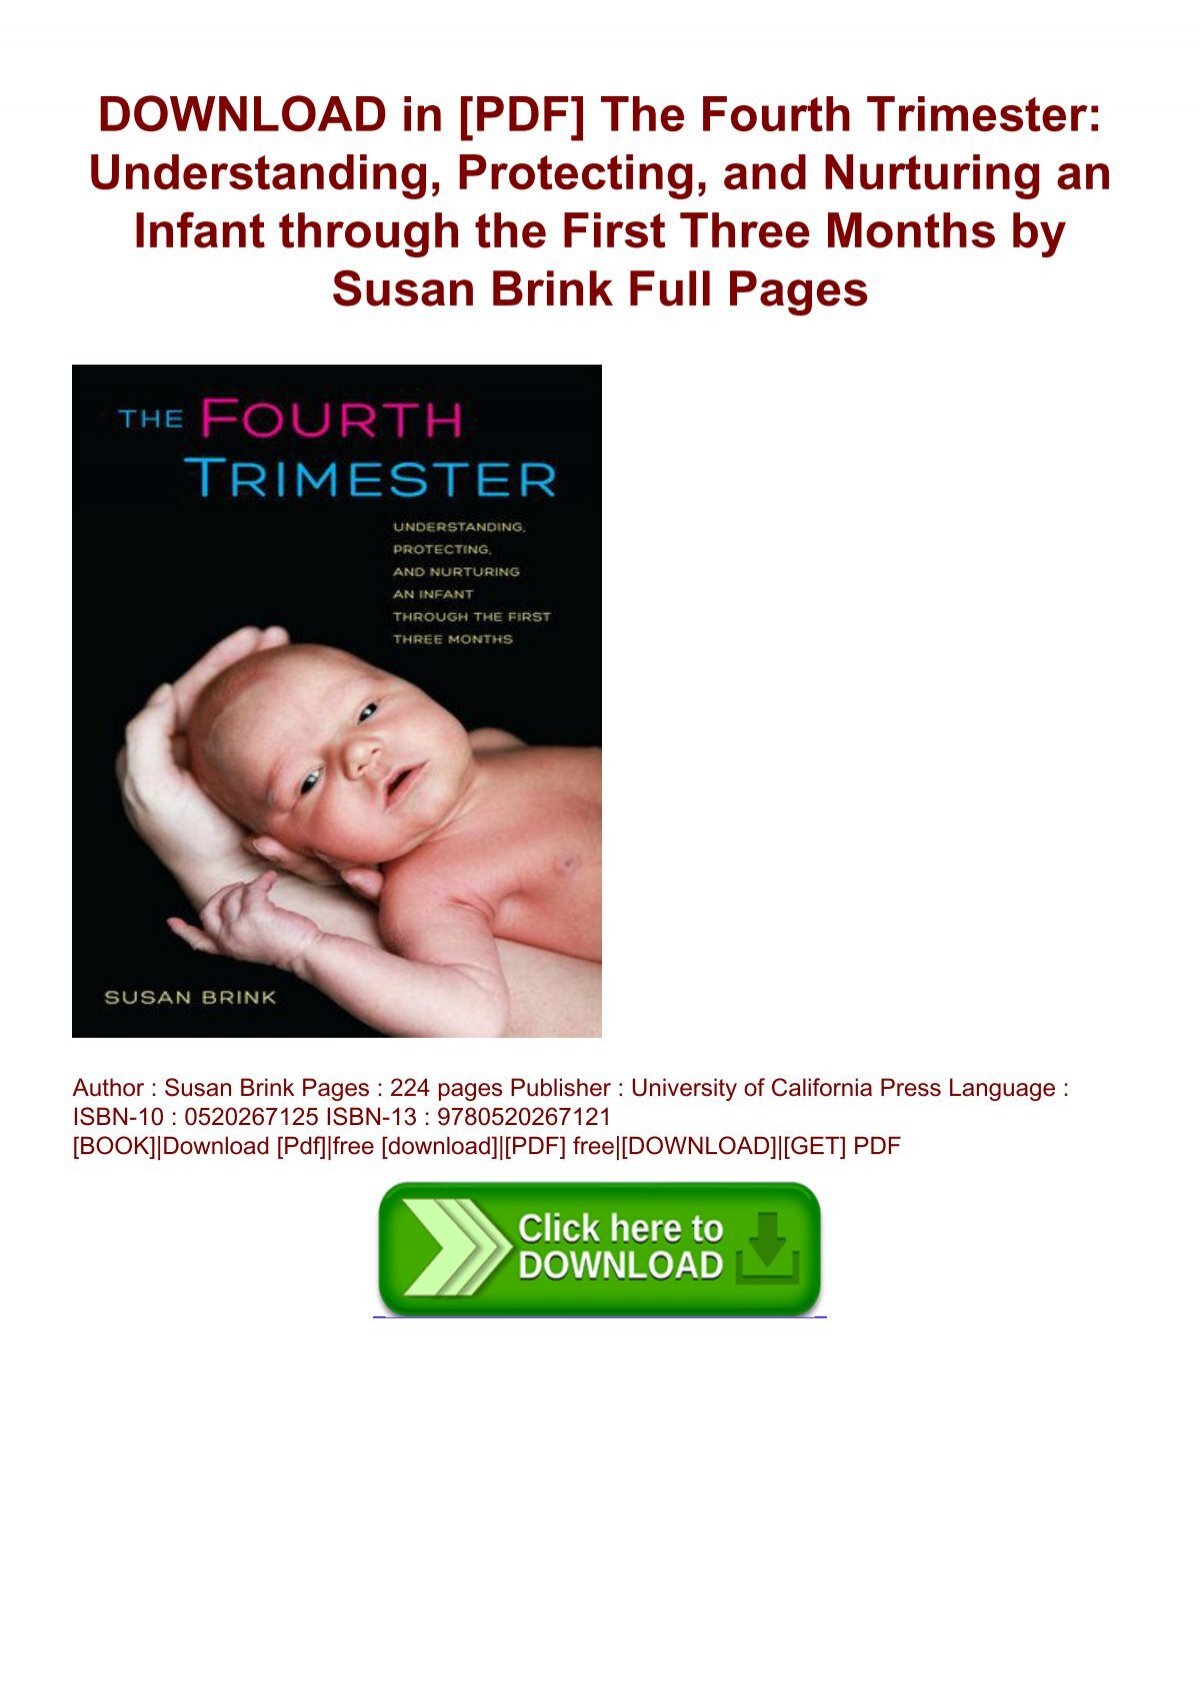 The concept of the fourth trimester refers to the first three